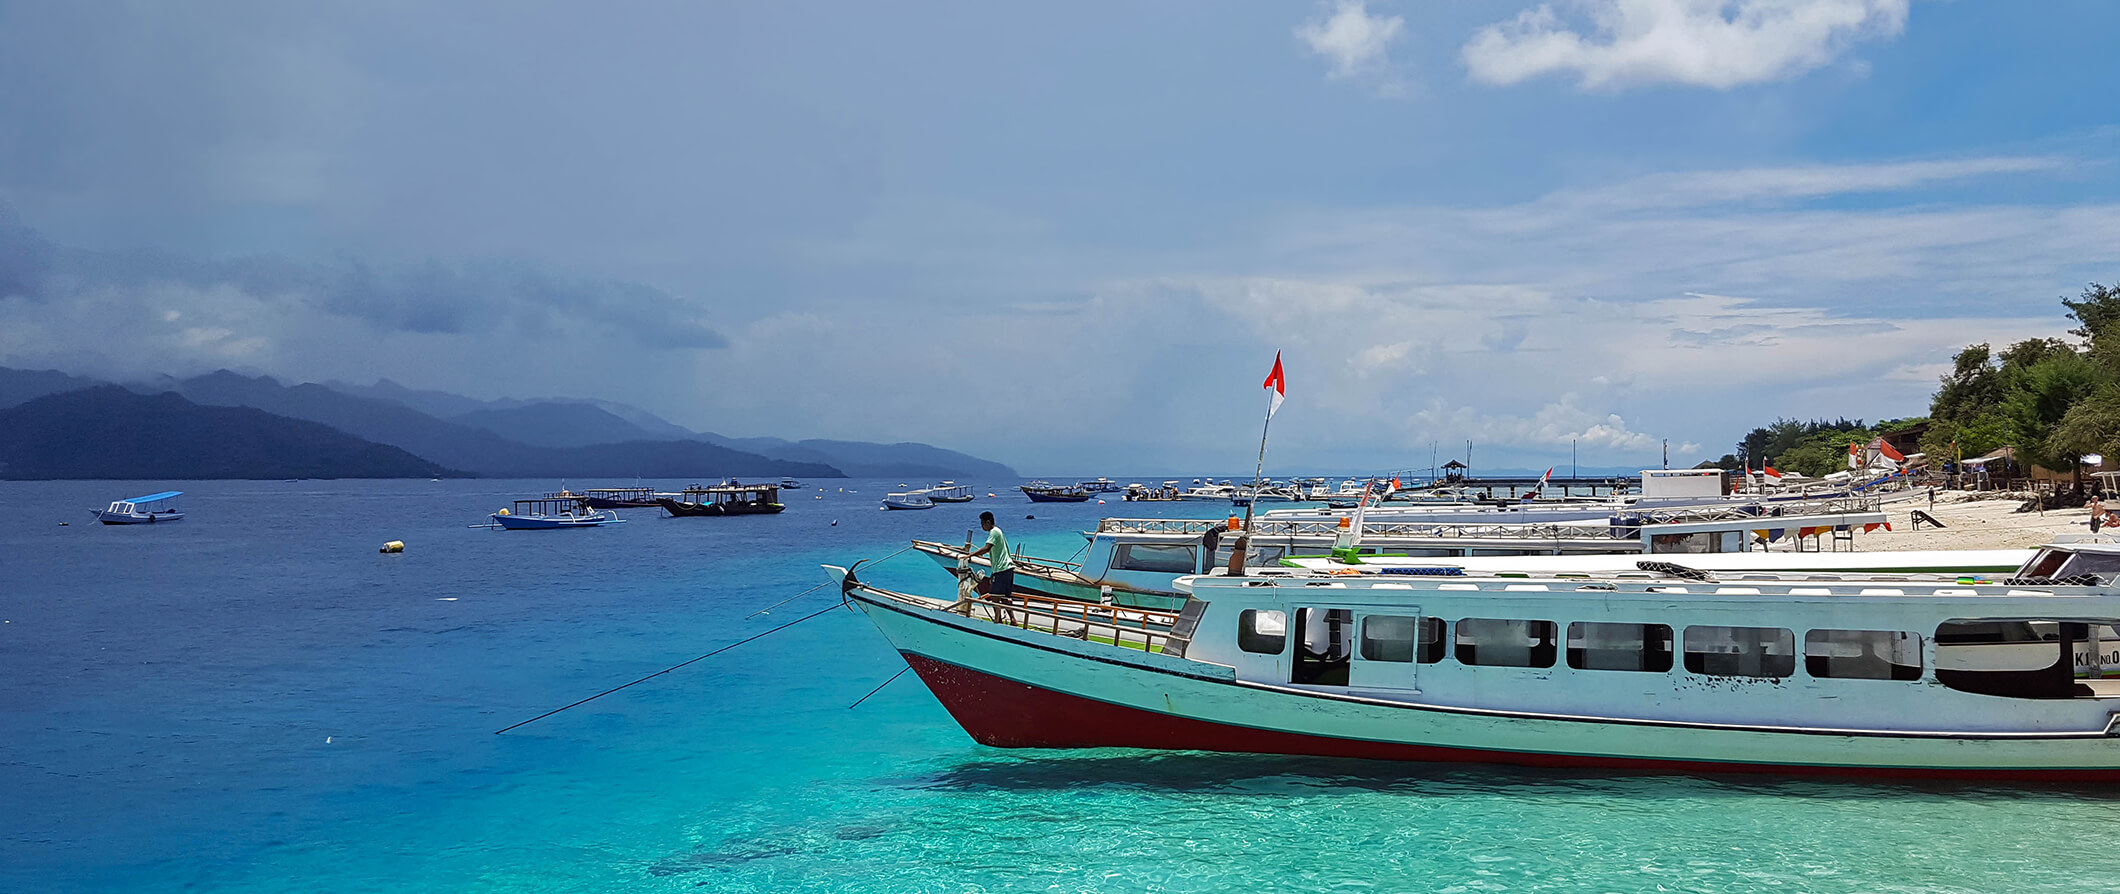 boats anchored at a beach in the Gili Islands